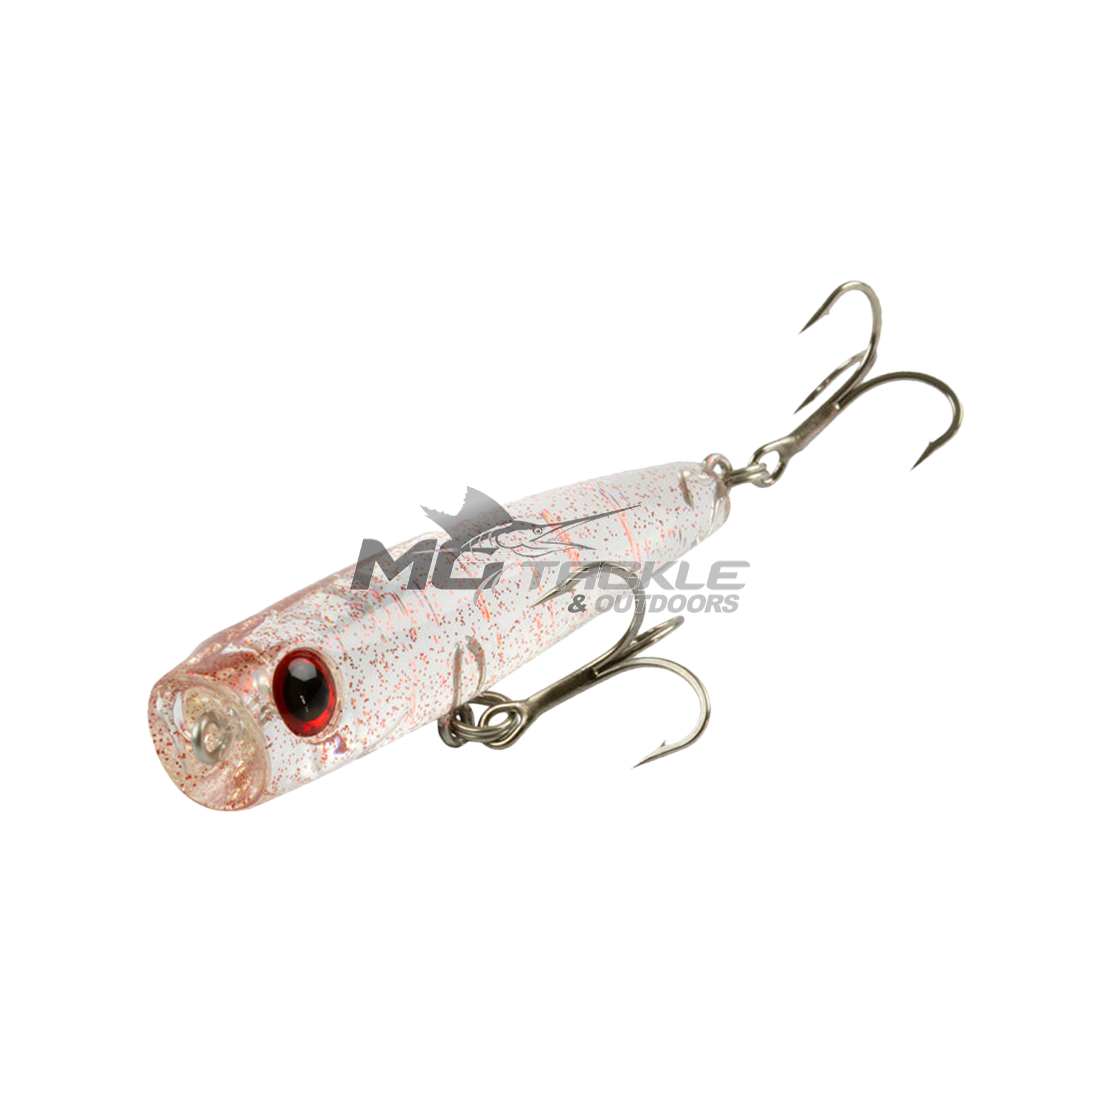 Bassday Crystal Popper 70S Lure